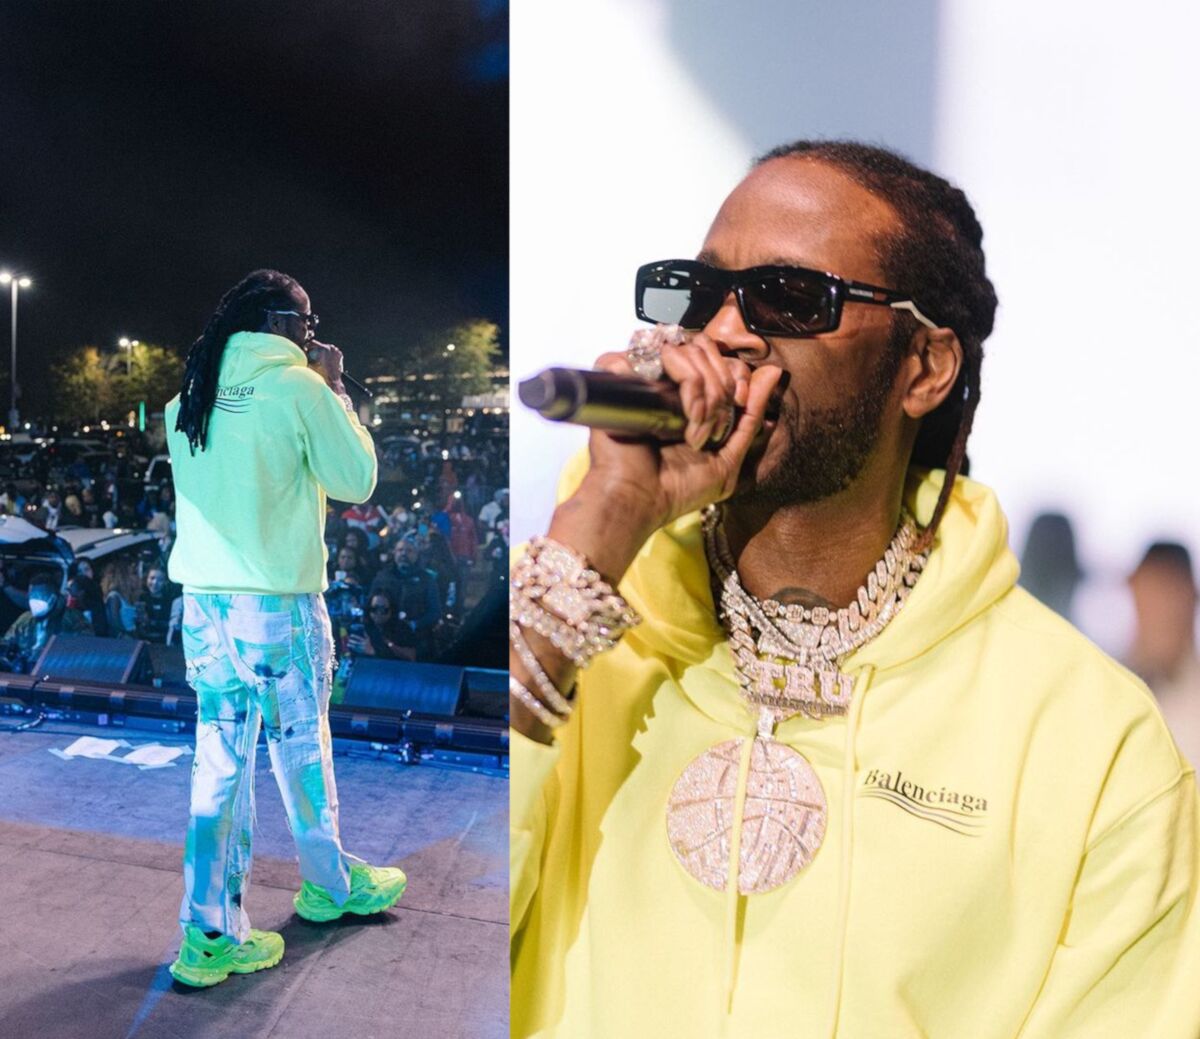 2 Chainz Performs At Celebrity Theater In a Balenciaga Hoodie, Sunglasses, & Sneakers